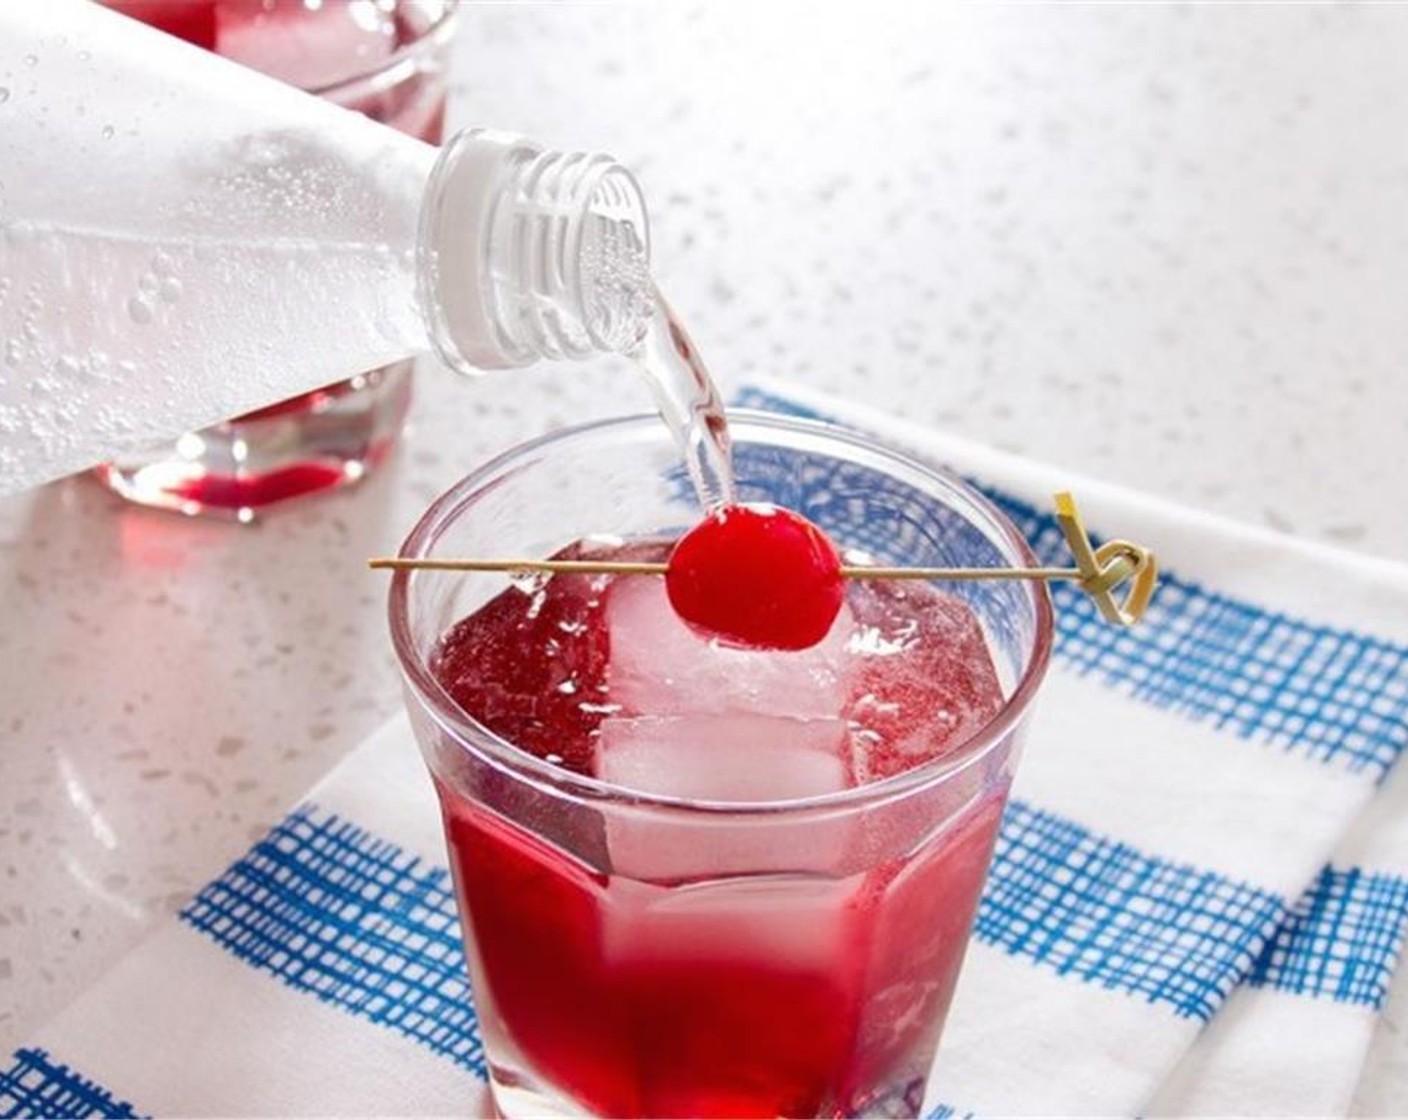 step 1 In a large glass, combine Pomegranate Juice (1/2 cup), Grenadine Syrup (1 splash), and GREY GOOSE® Vodka (1/2 cup). Stir to combine, and then pour into two glasses over ice. Top each glass with half of the Sparkling Lemon Water (1/2 cup).